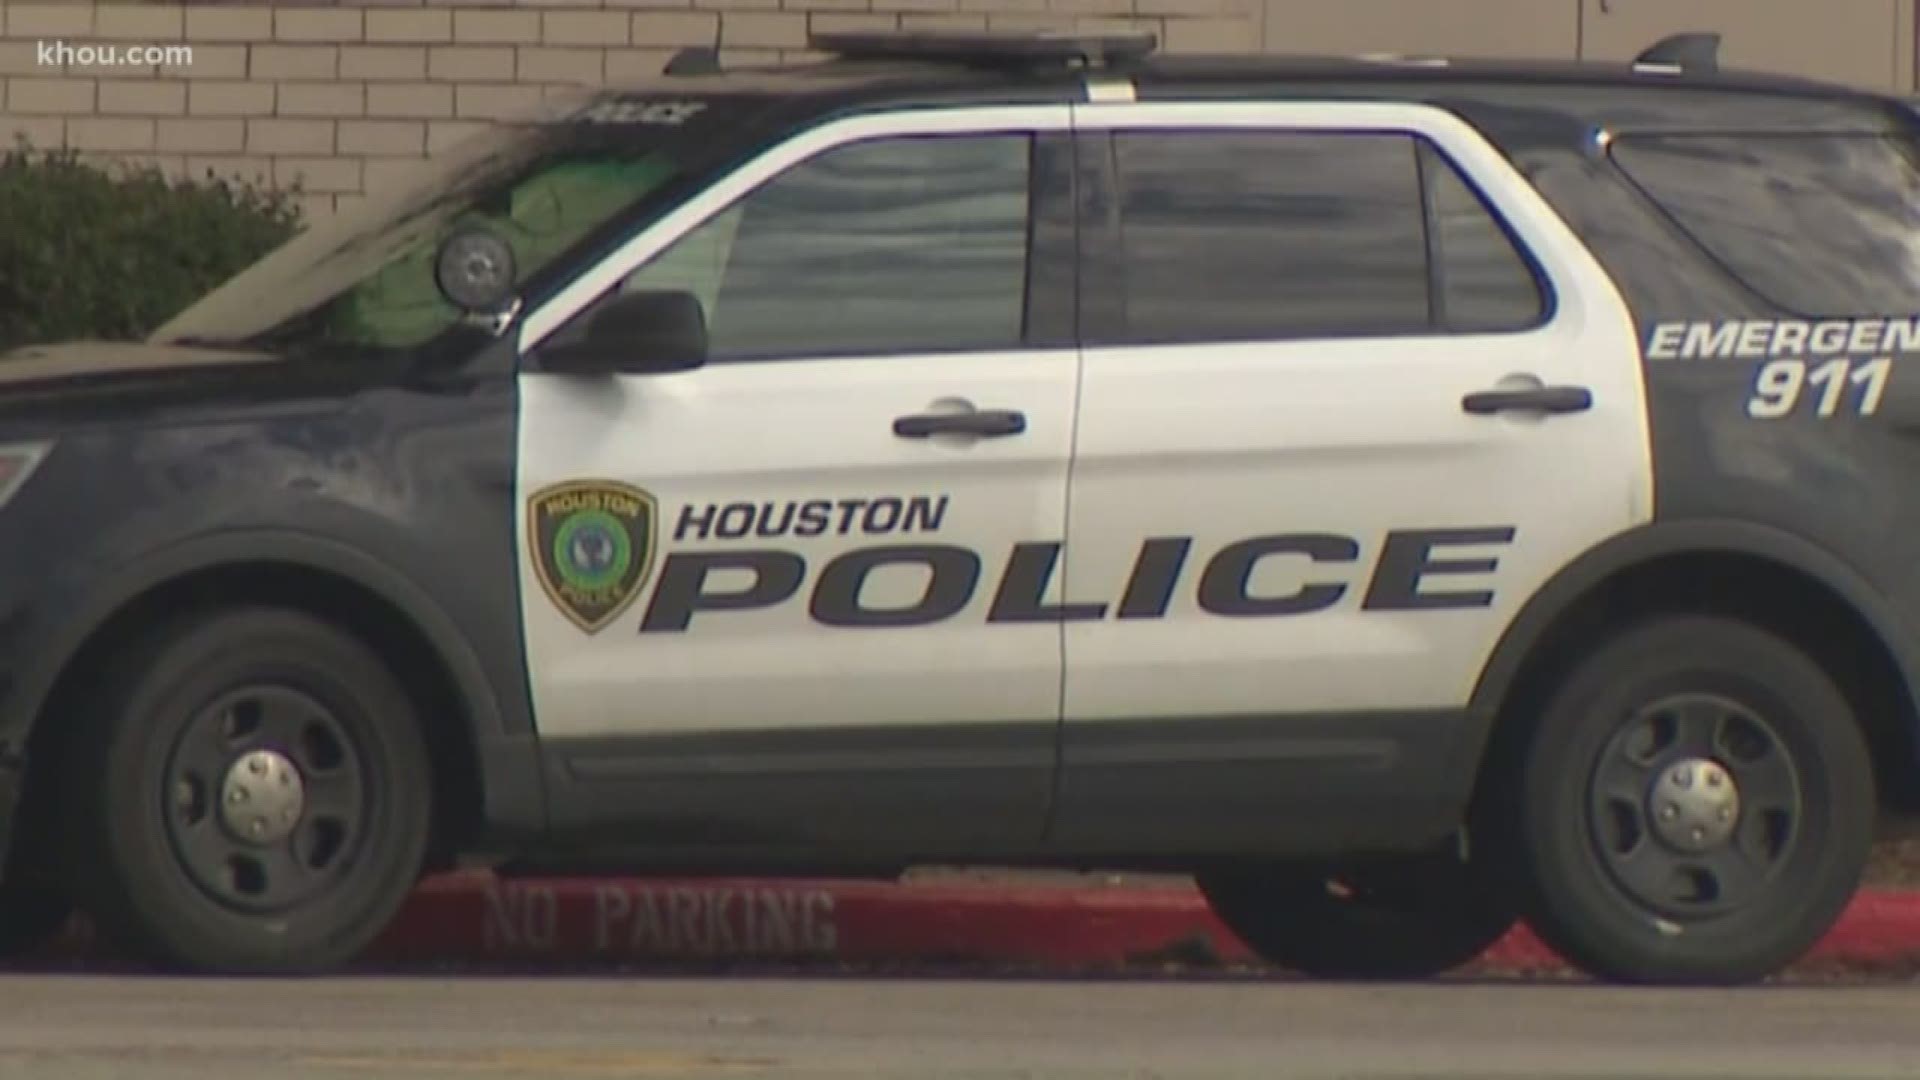 The Houston Police Department said four thieves used a hammer to smash several glass cases inside Zales jewelry store Monday. Two of the suspects have been taken into custody.